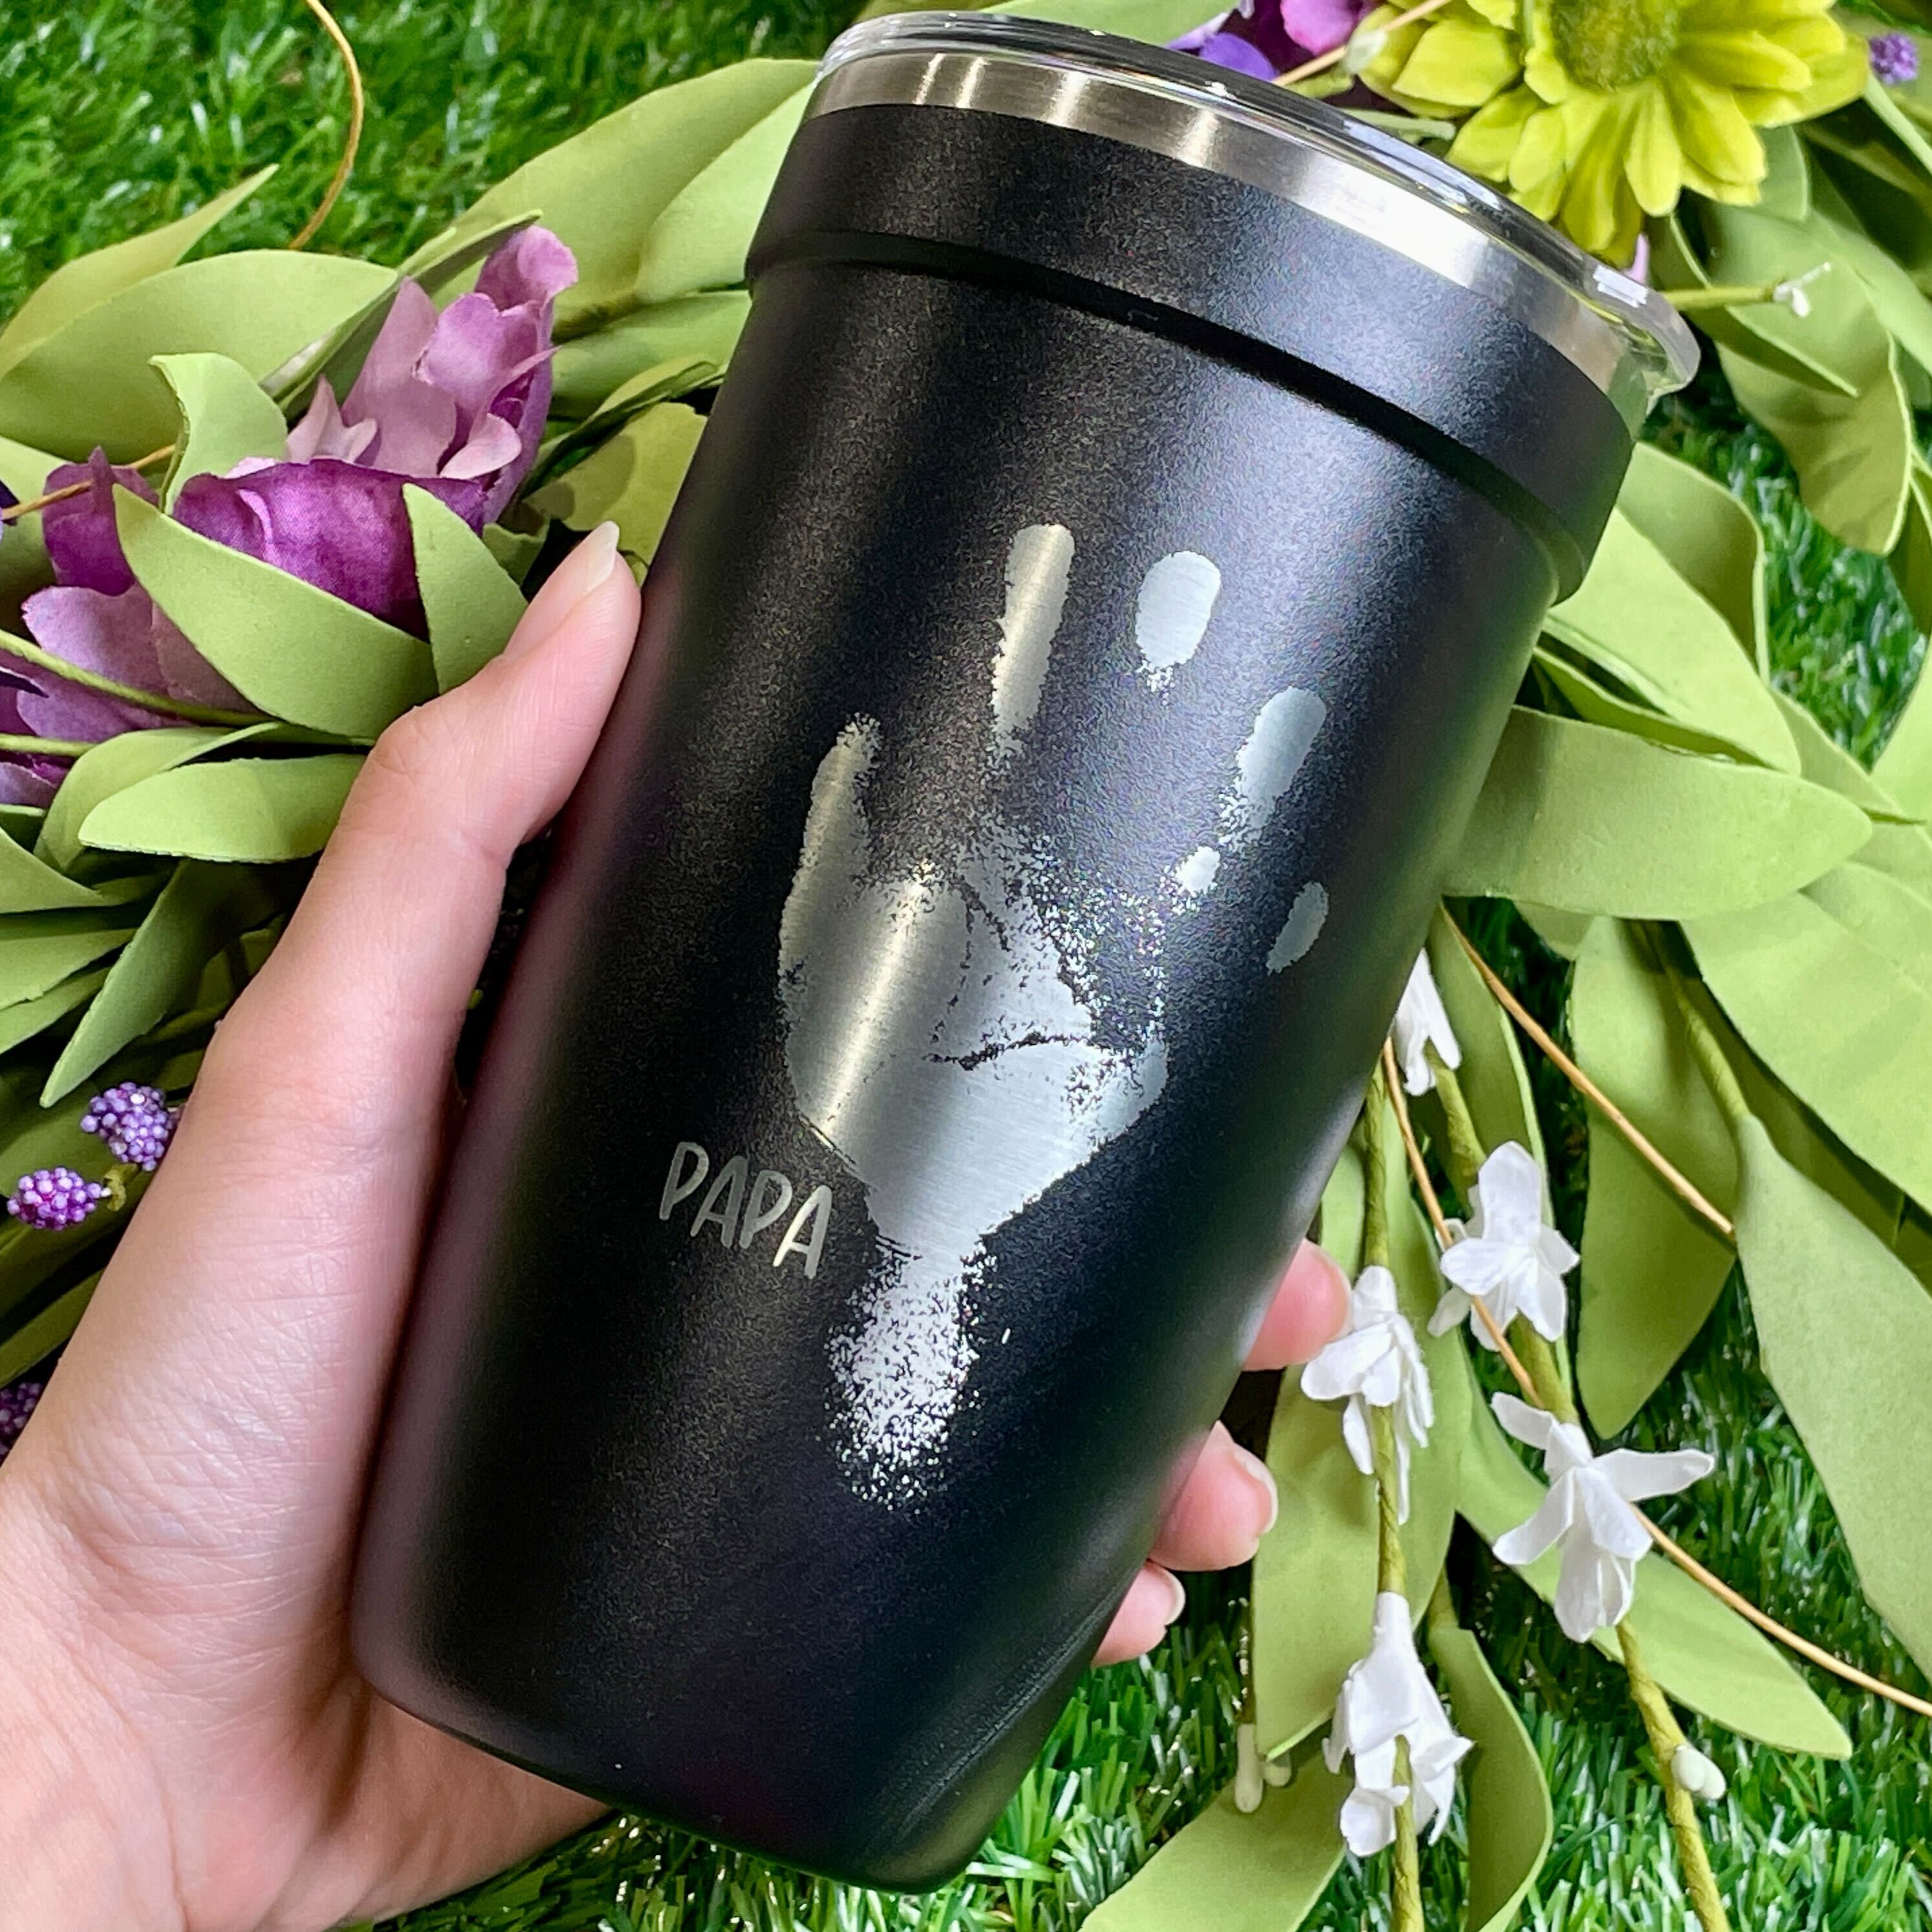 LAMOSE Personalized Insulated tumbler with engraved images of Babies hand and footprints, ideal for hot and cold beverages, perfect gift for parents.